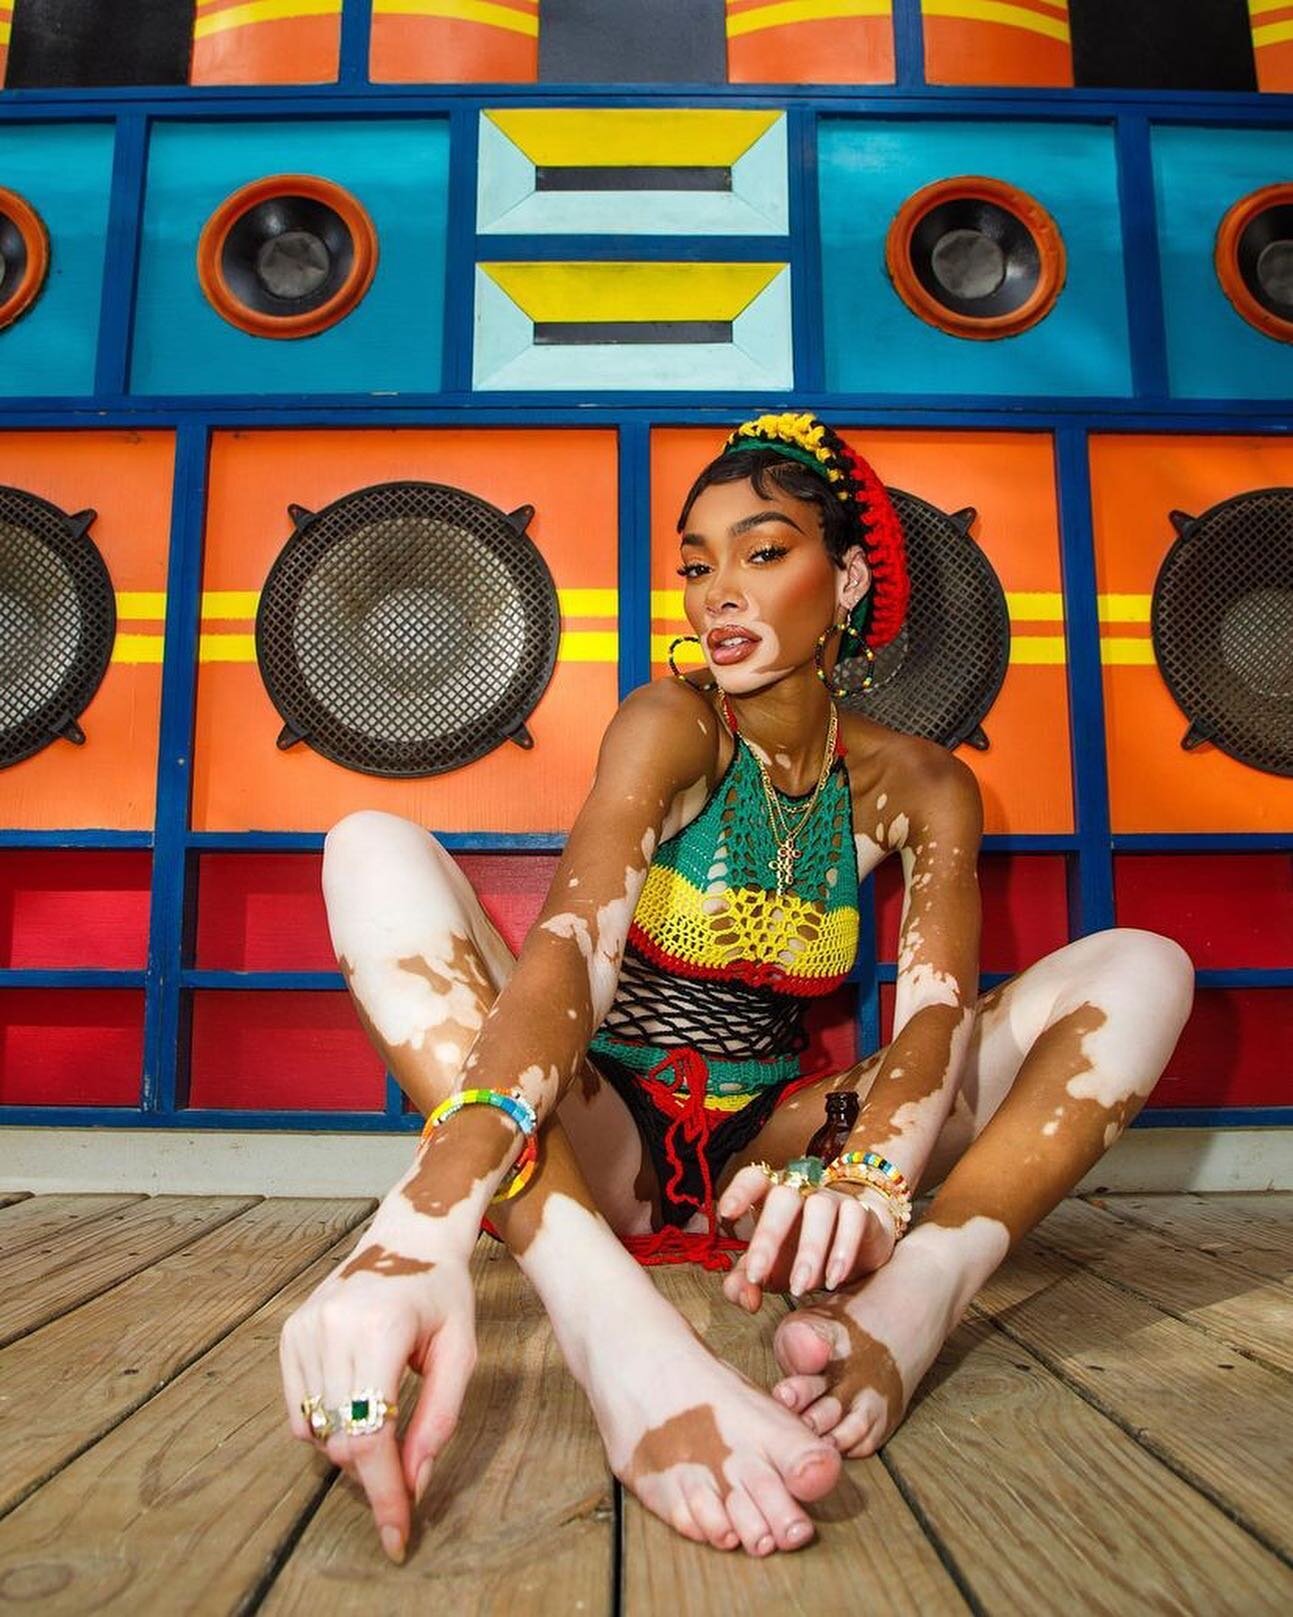 Monday Mood from Caribbean Boss Lady @winnieharlow 🇯🇲

#rp 

Find your way home.. Jamaica ❤️💛💚🖤 every one keeps calling me &ldquo;Daughter of the Soil&rdquo; 🇯🇲 my beloved beautiful Jamaica.. my roots. My culture. My Soul. I love you so. I&rsq